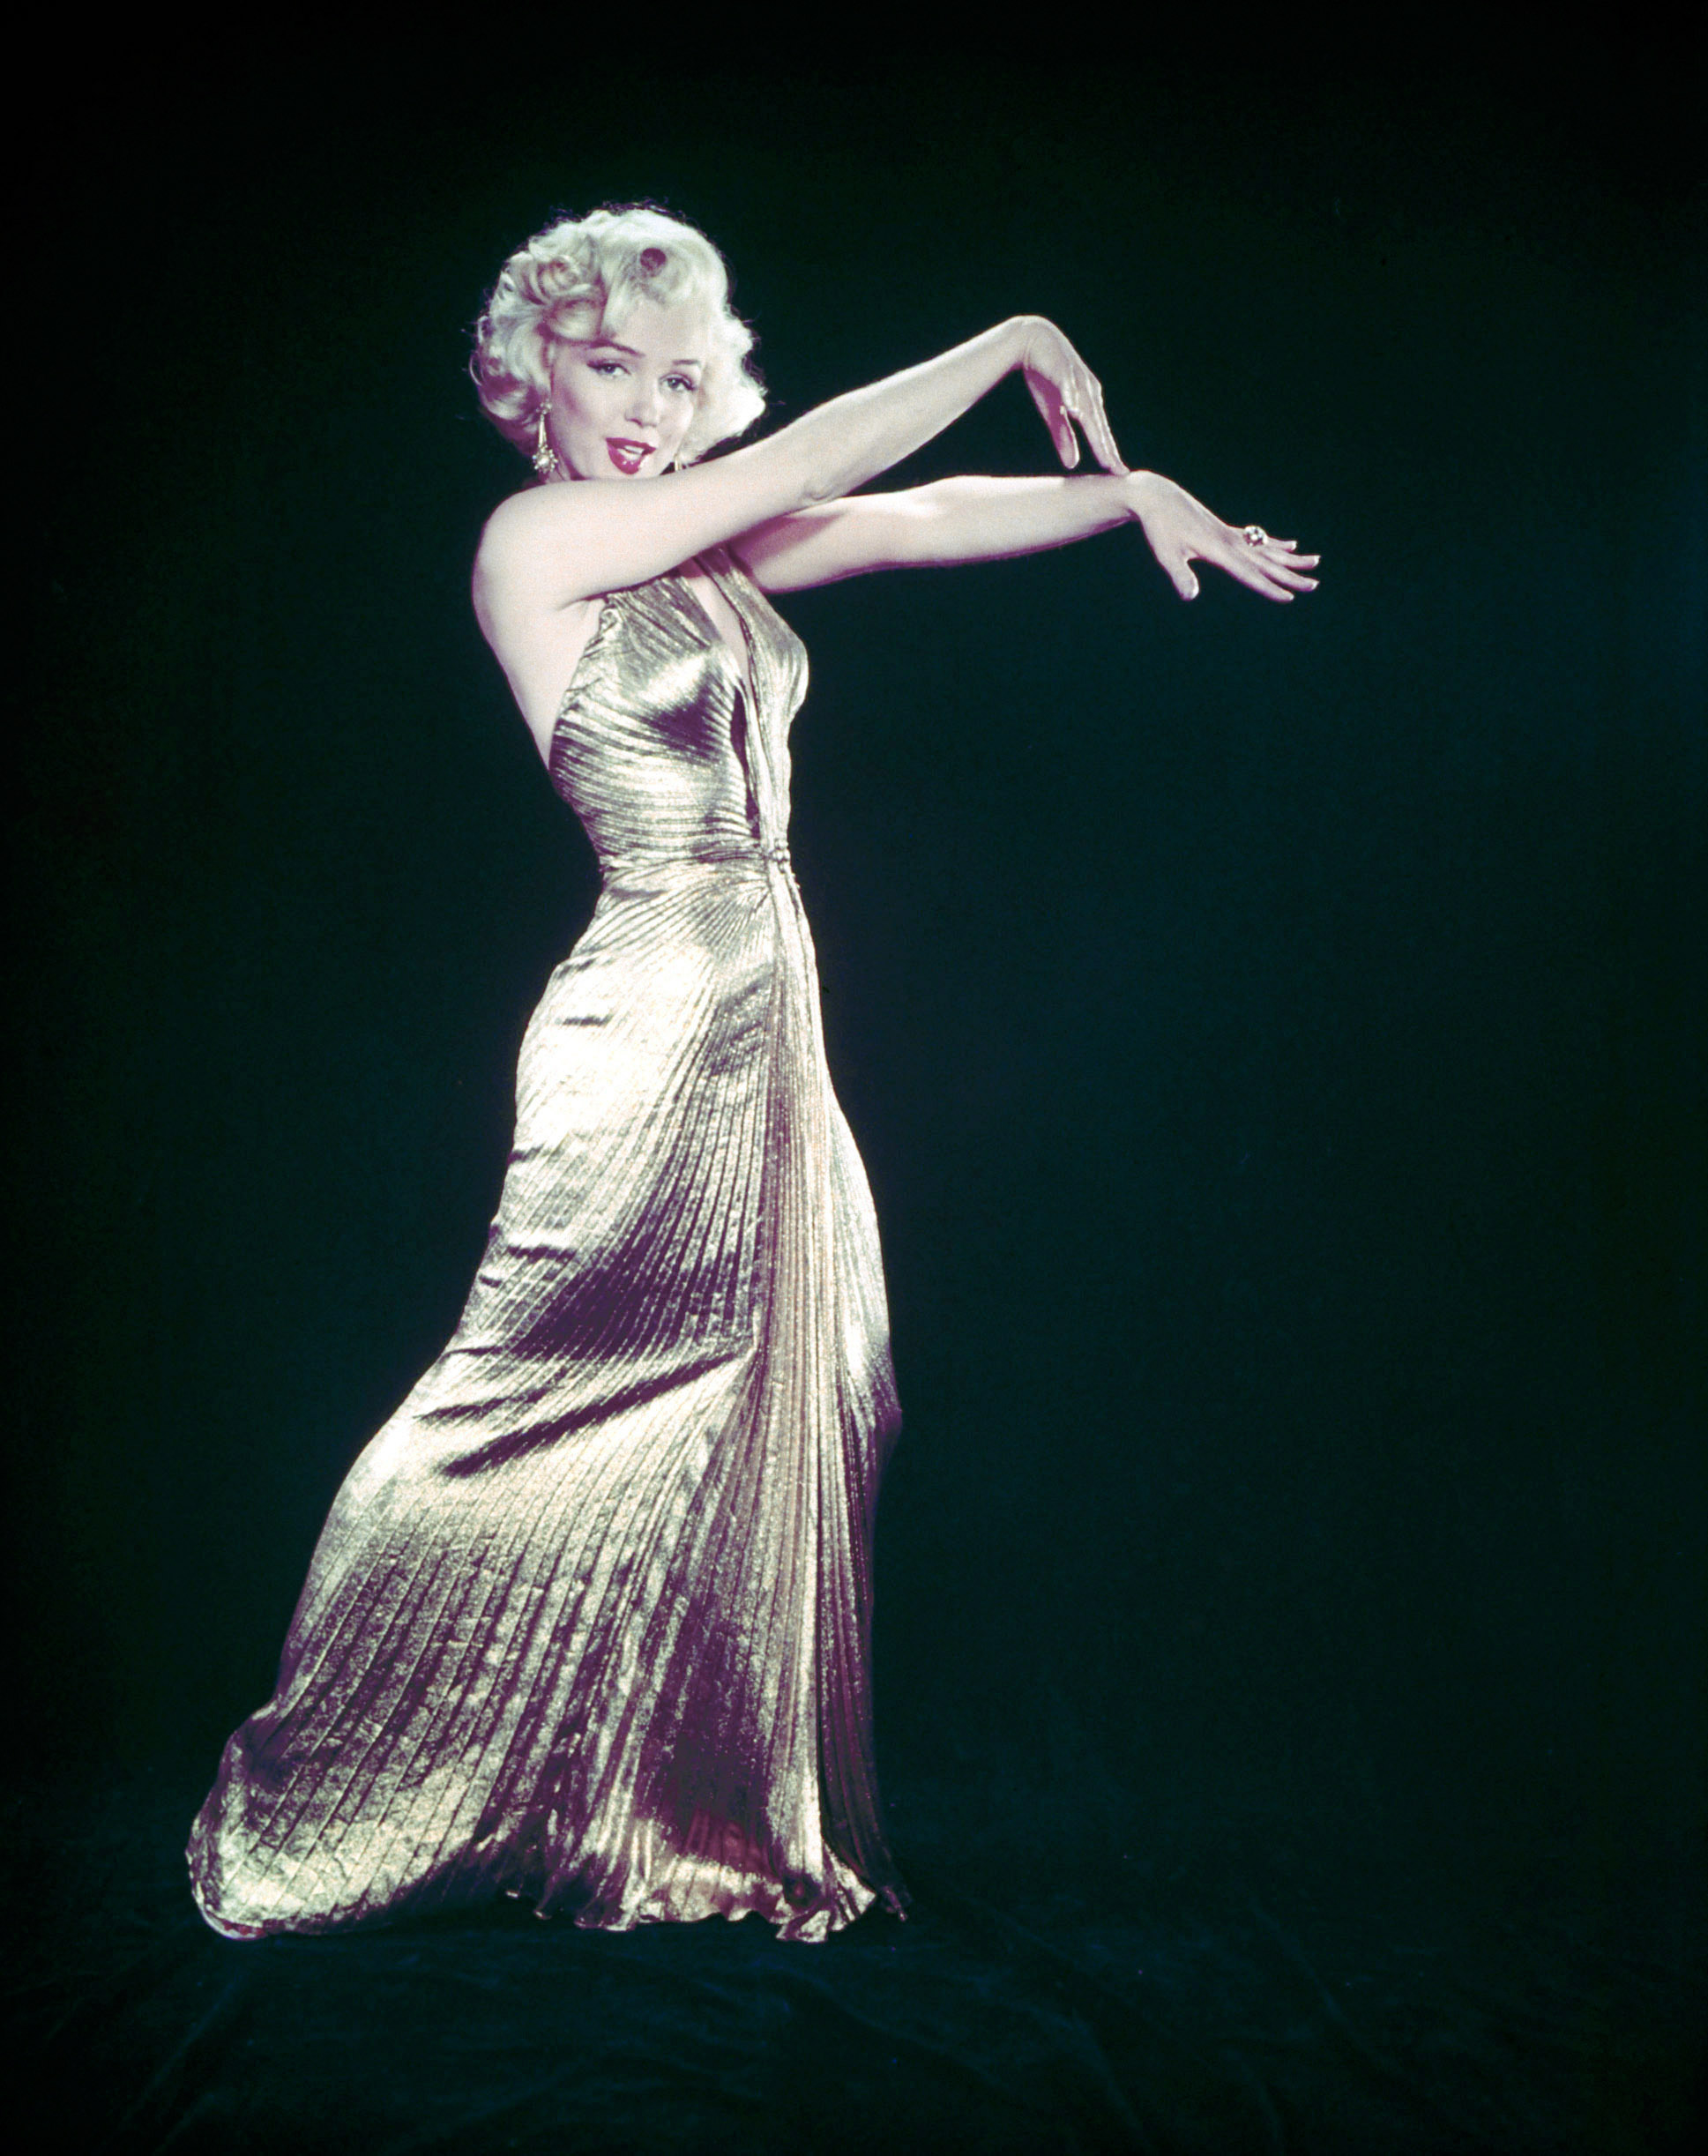 Marilyn Monroe wearing her famous gold lame gown designed by Bill Travilla for a publicity still for the motion picture "Gentlemen Prefer Blondes," 1953.